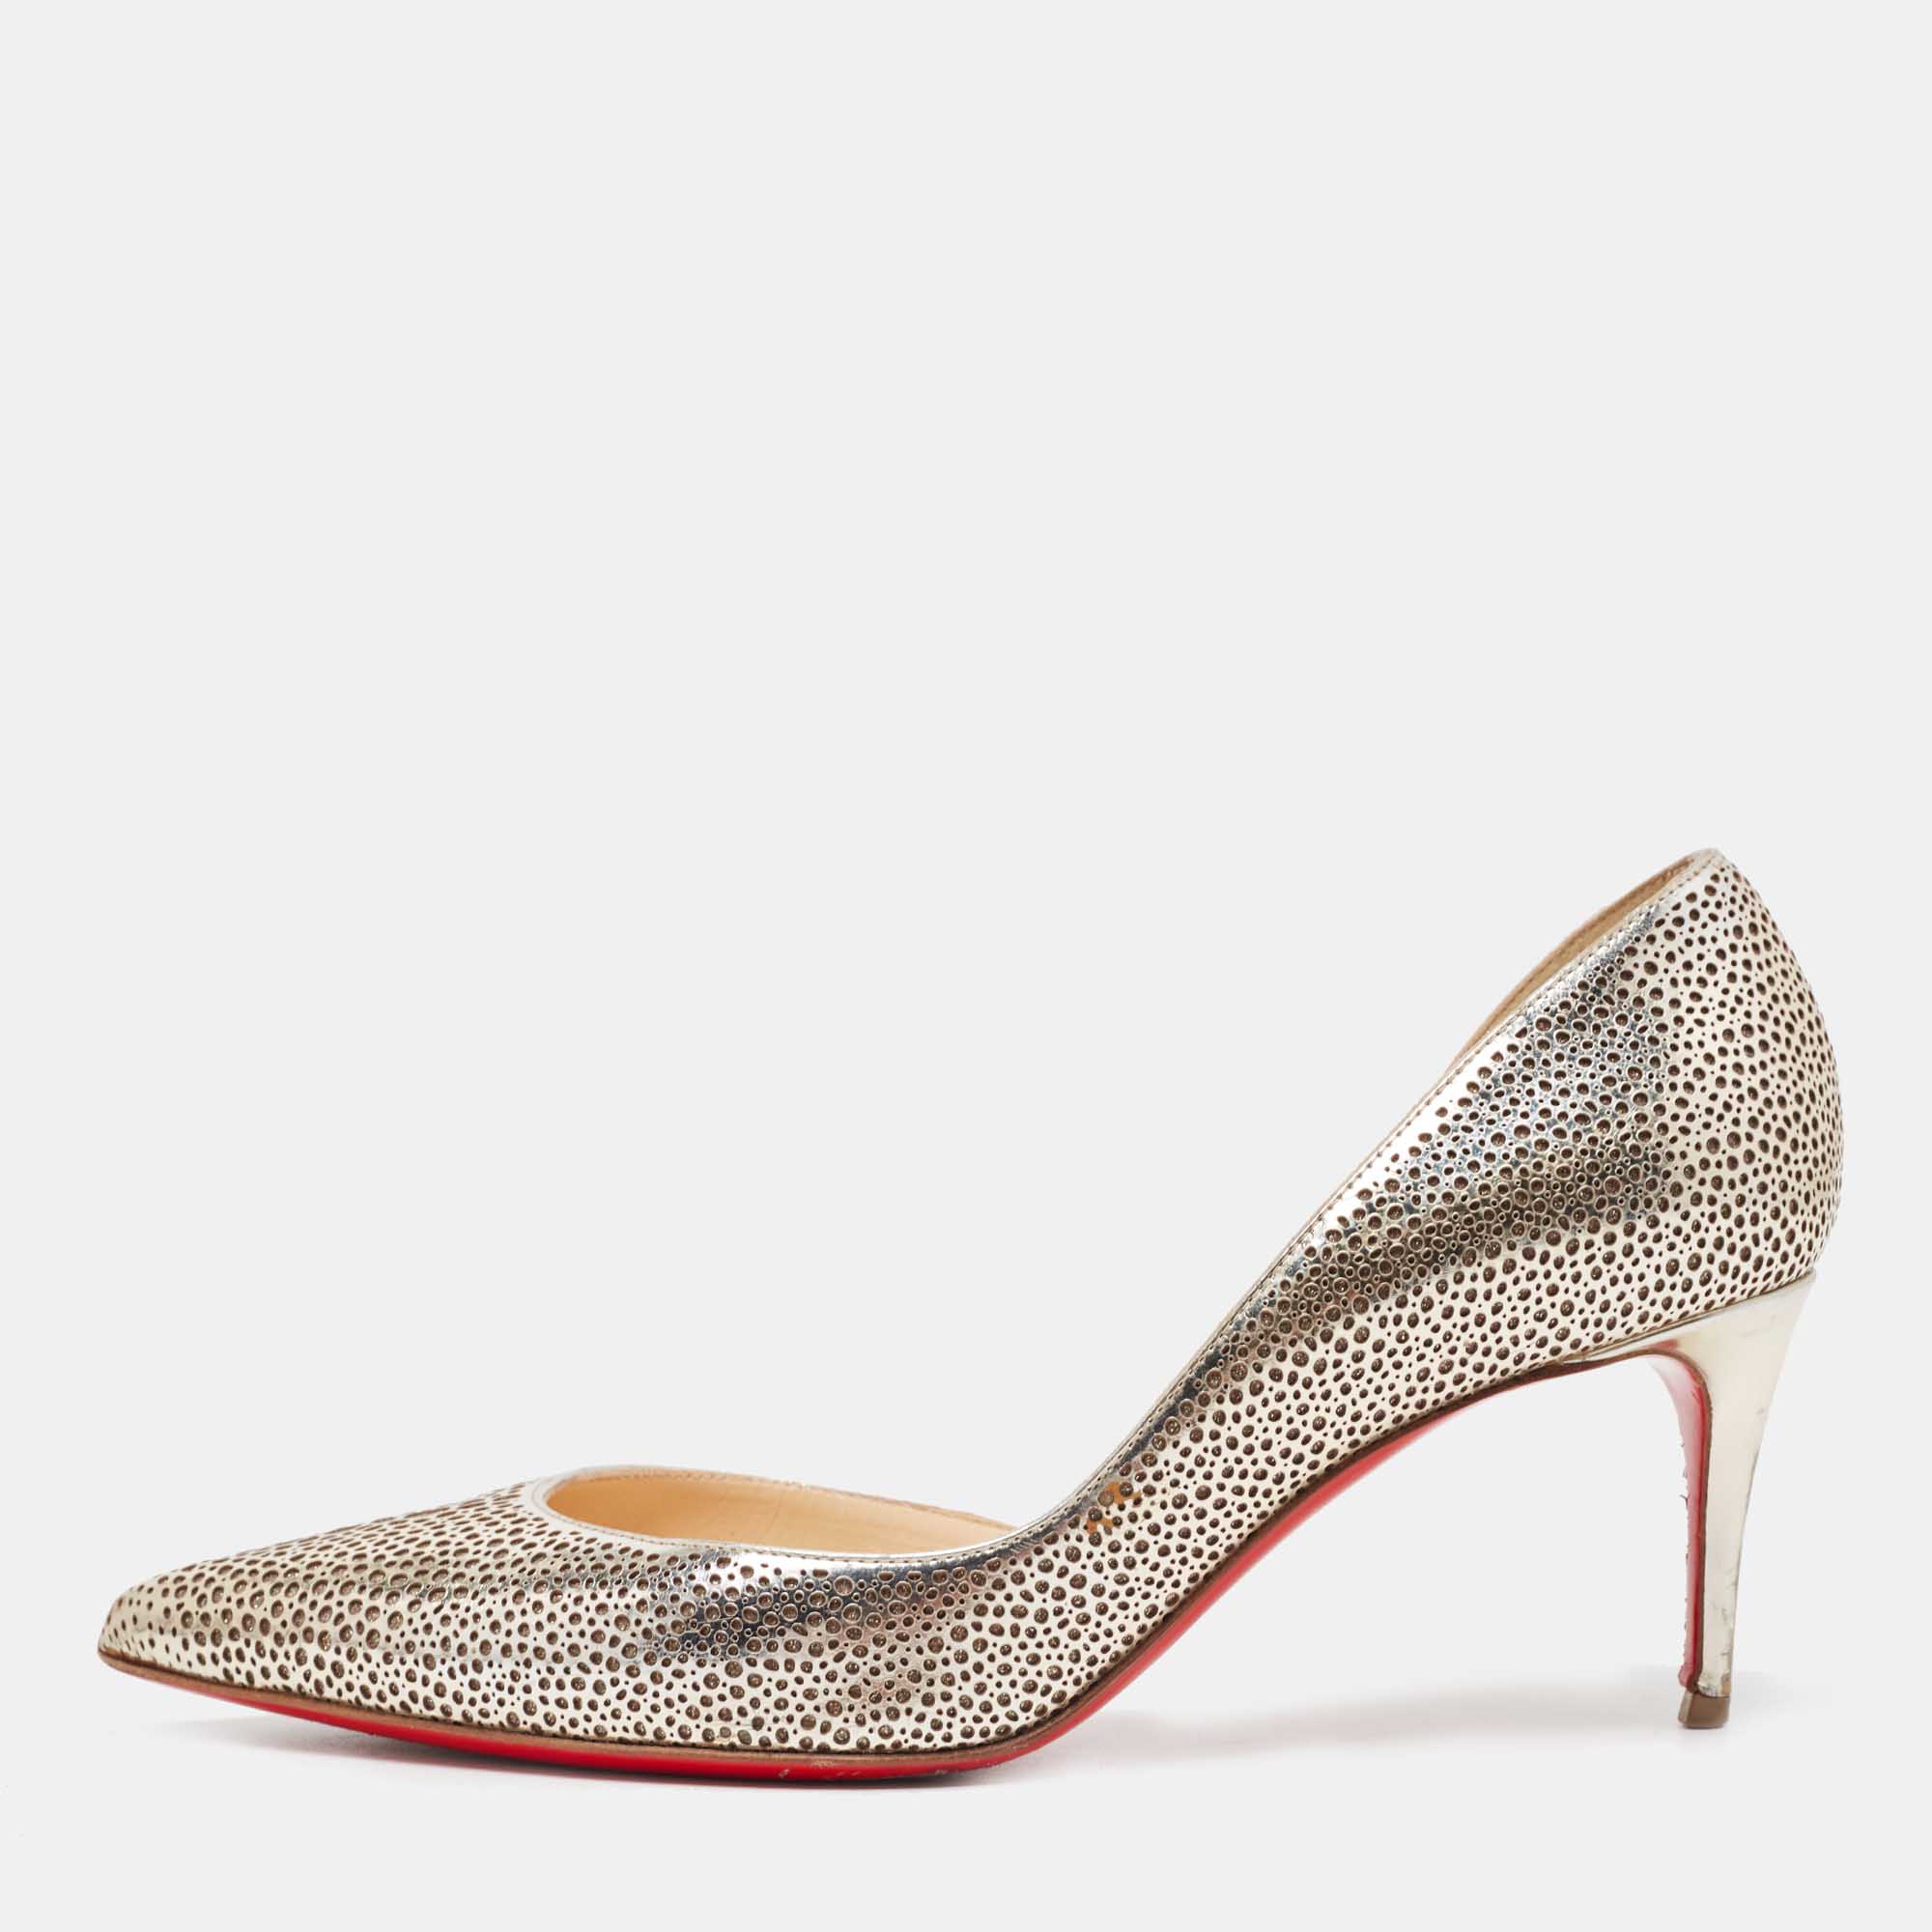 Christian louboutin gold laser cut leather and glitter galu d'orsay pumps size 36